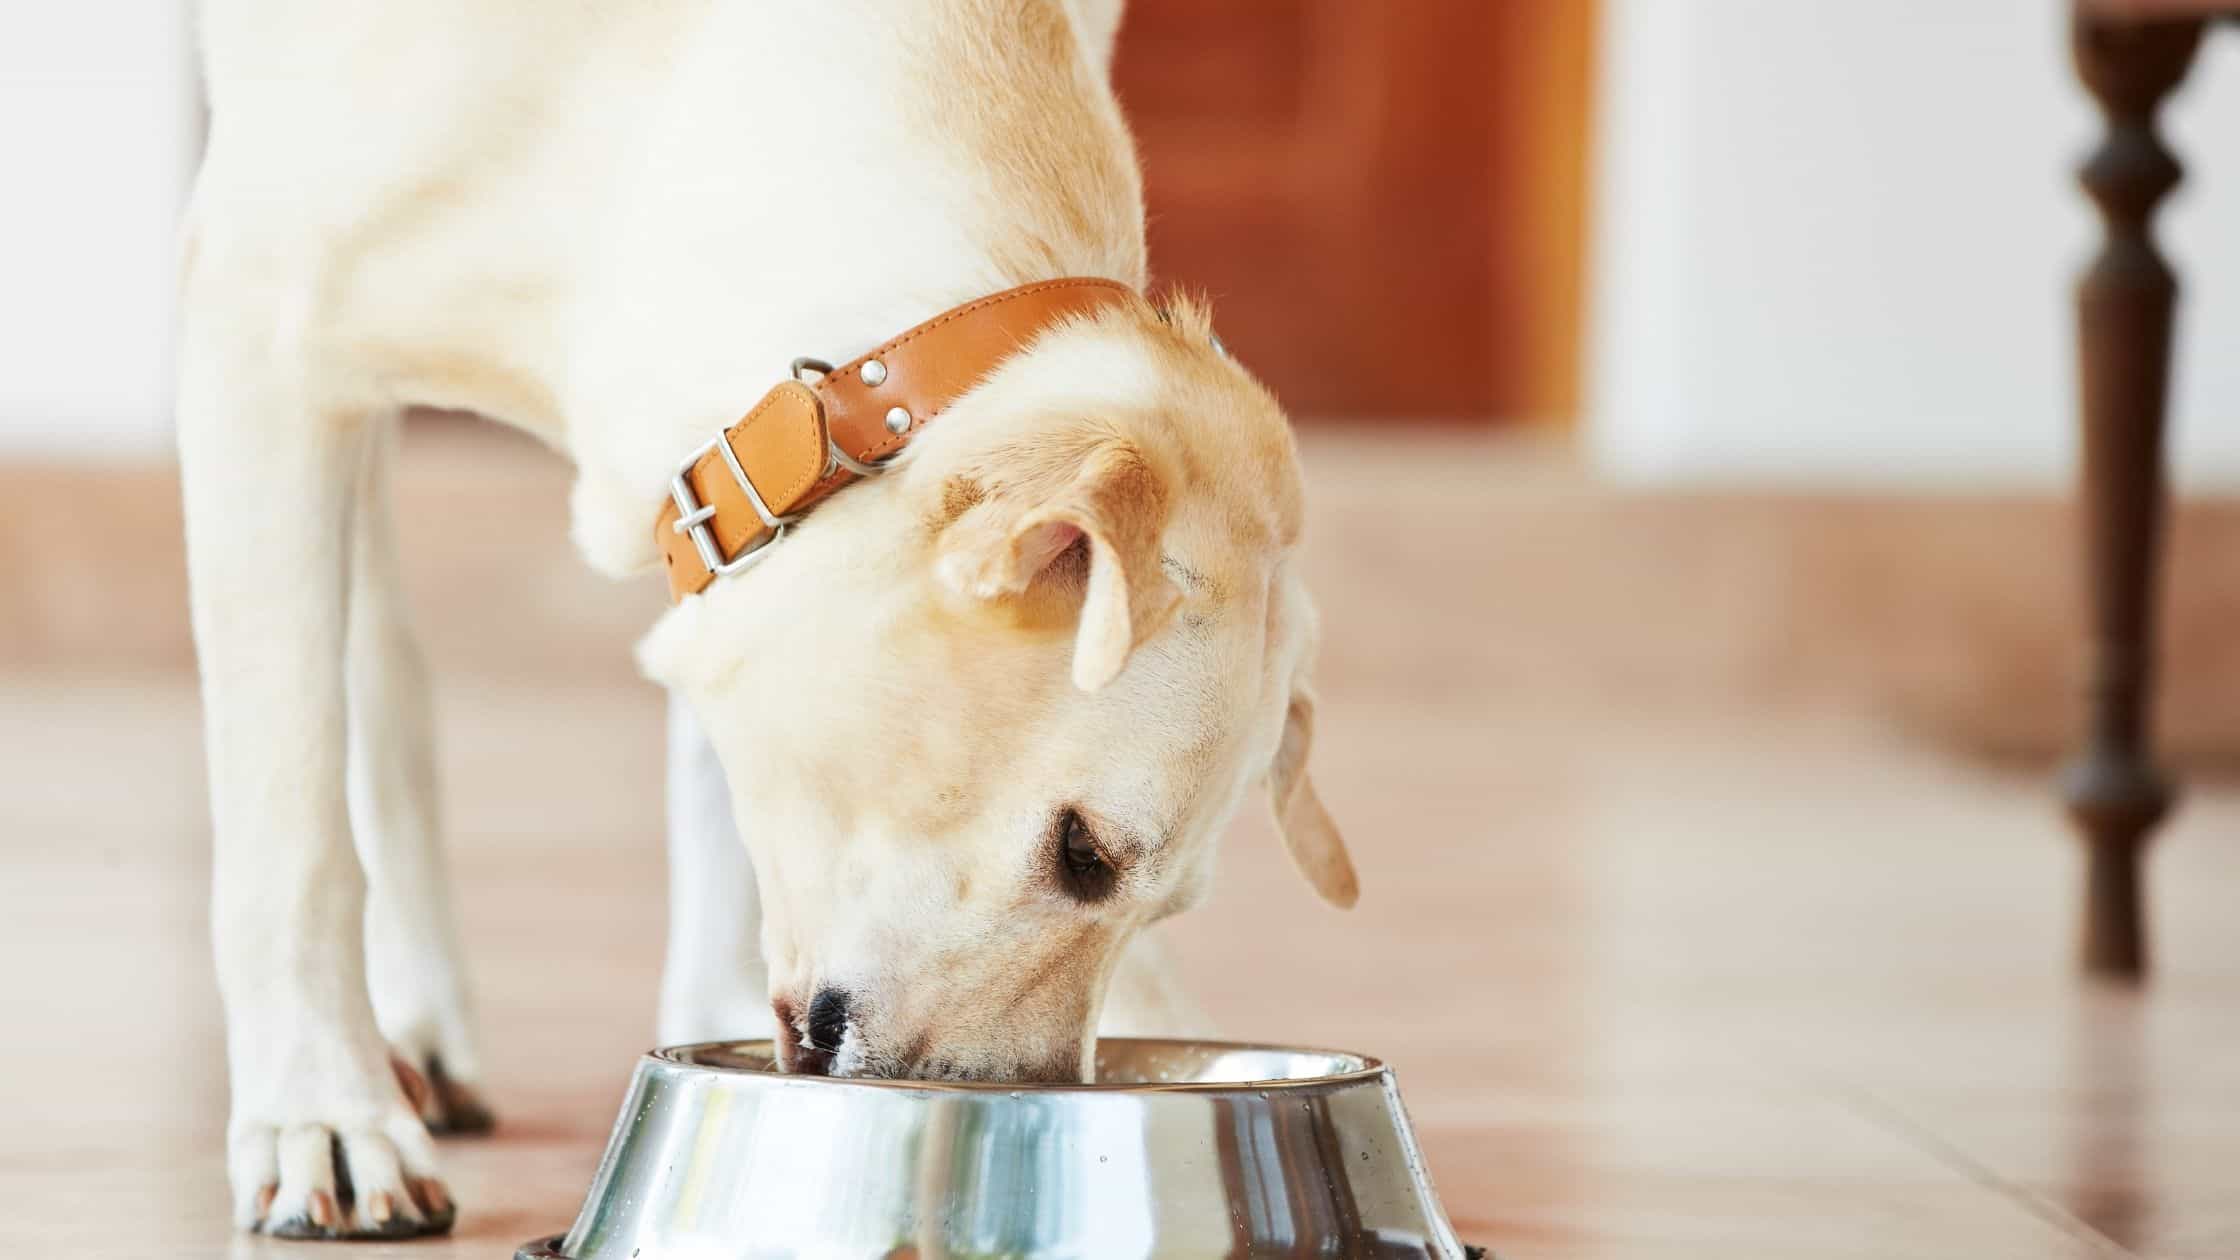 The top foods that should be given to dogs